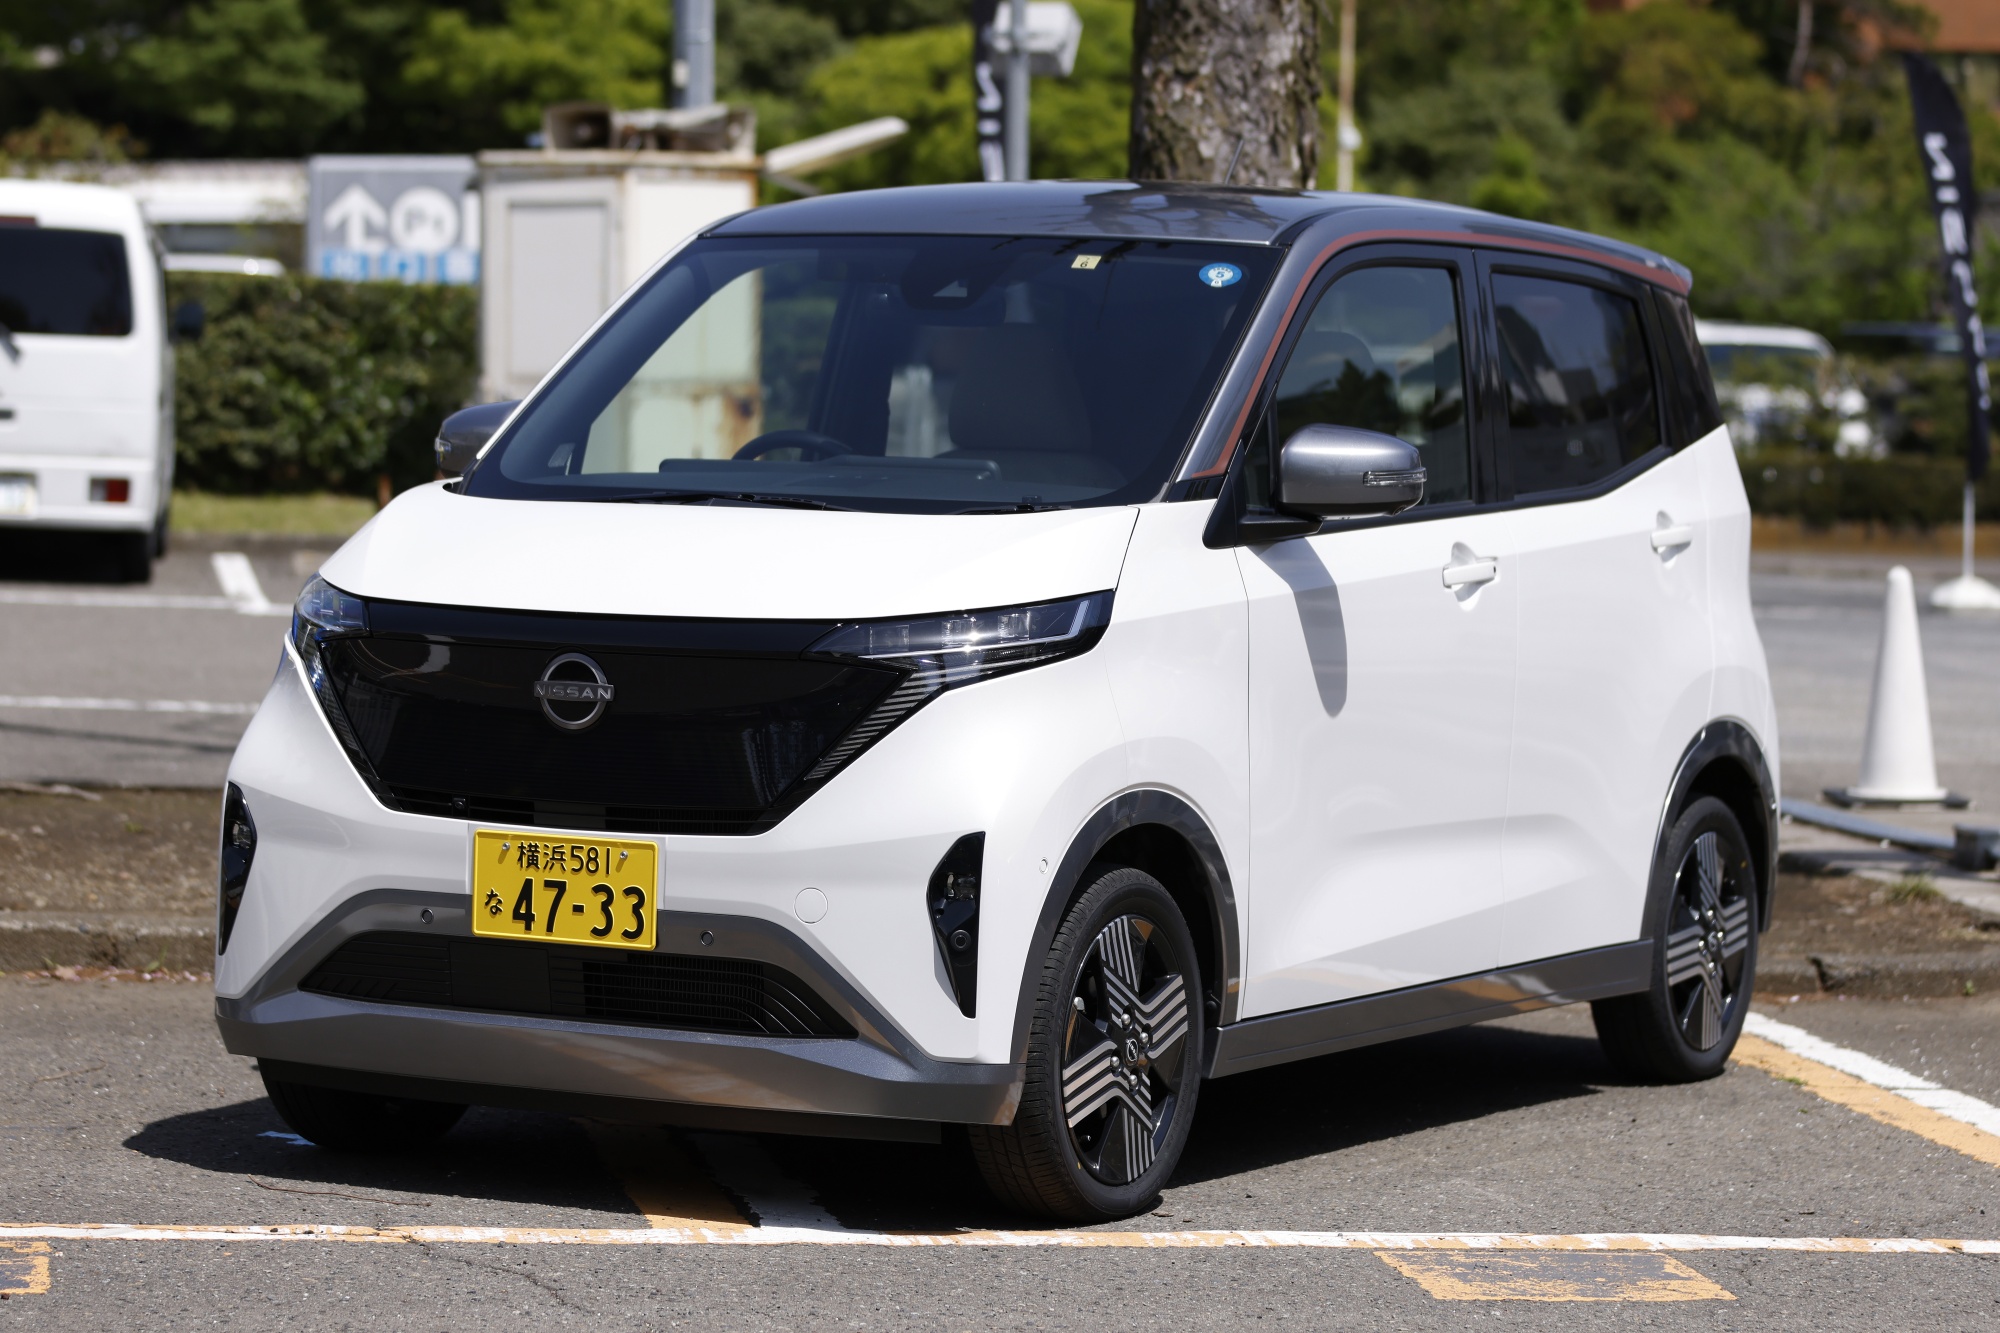 Nissan wants to launch affordable EVs sooner as rivals delay plans